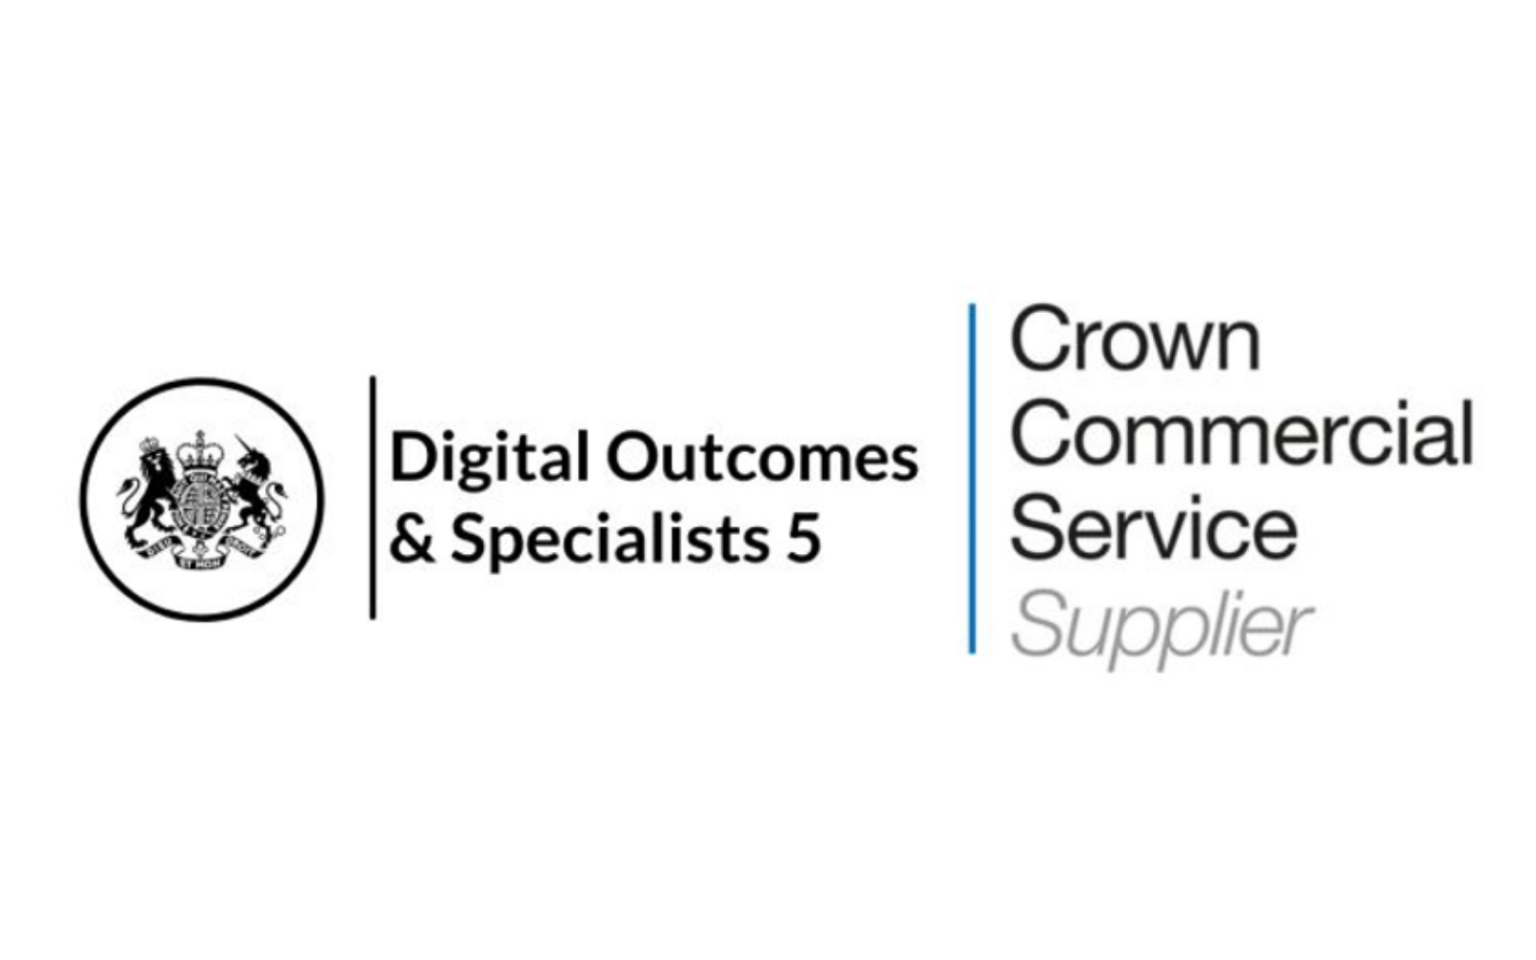 Digital Outcomes and Specialists 5 Framework